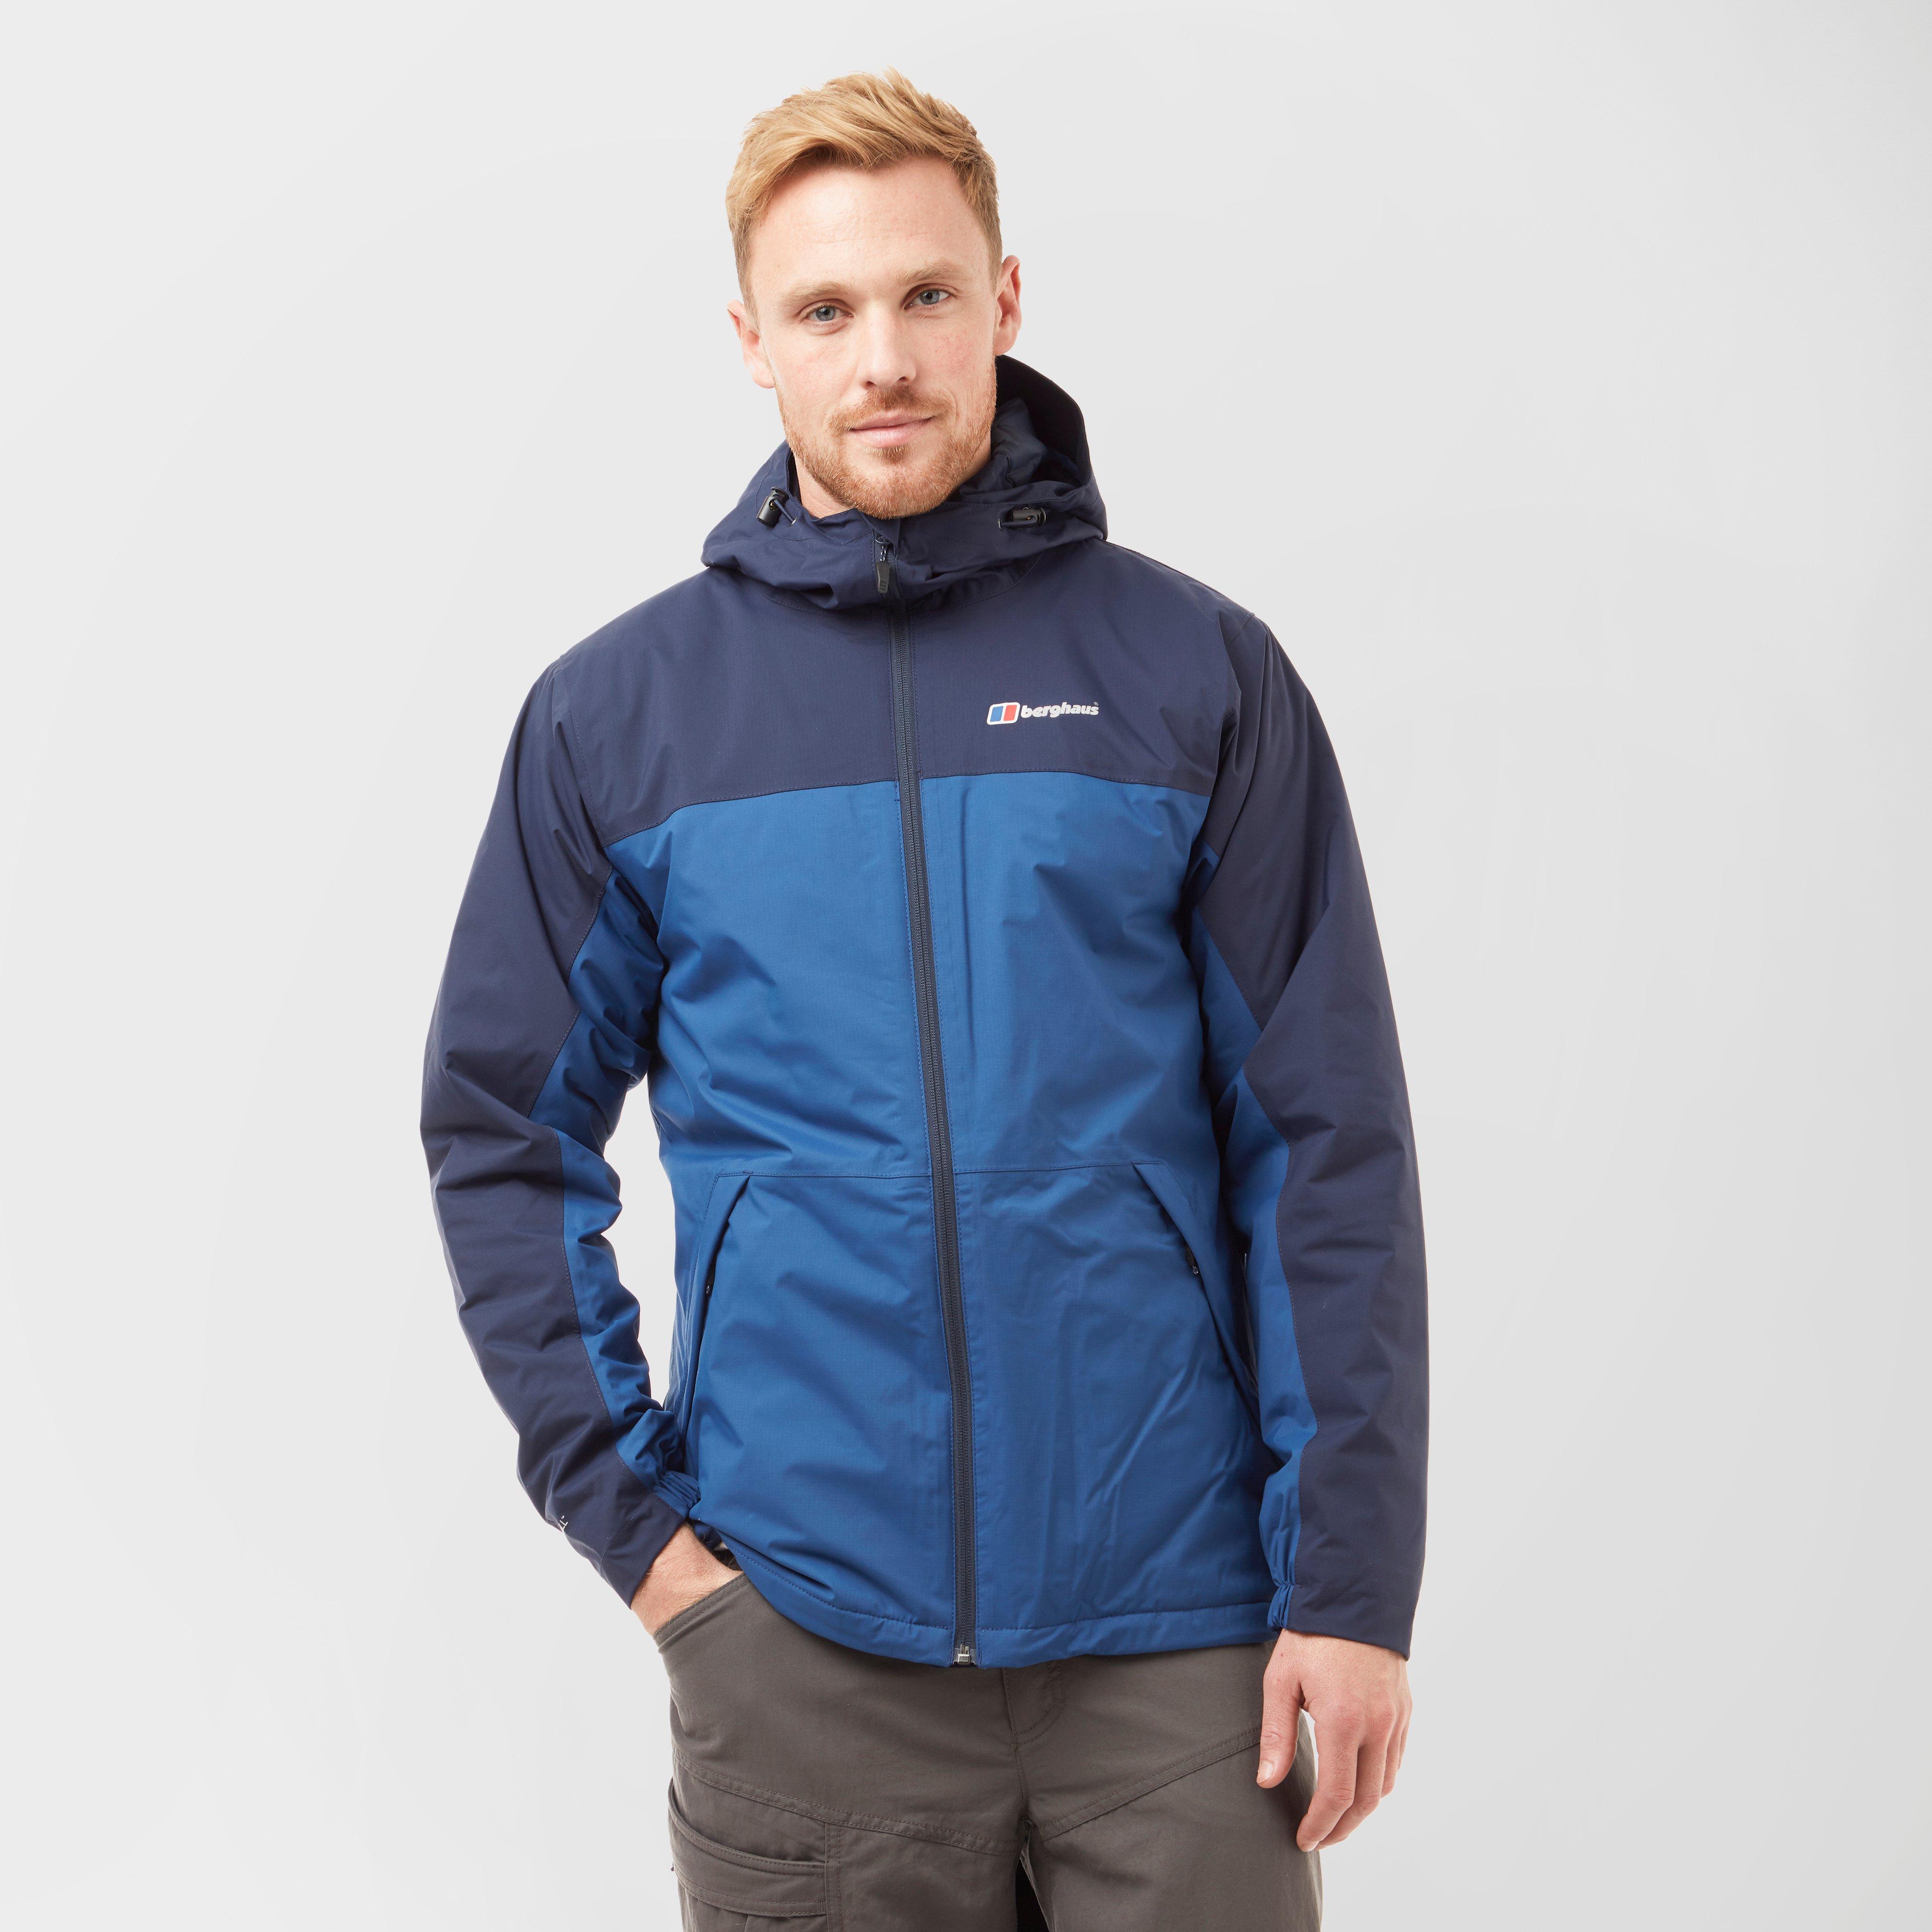 £110.00 for Berghaus mens stormcloud insulated jacket - navy- navy ...